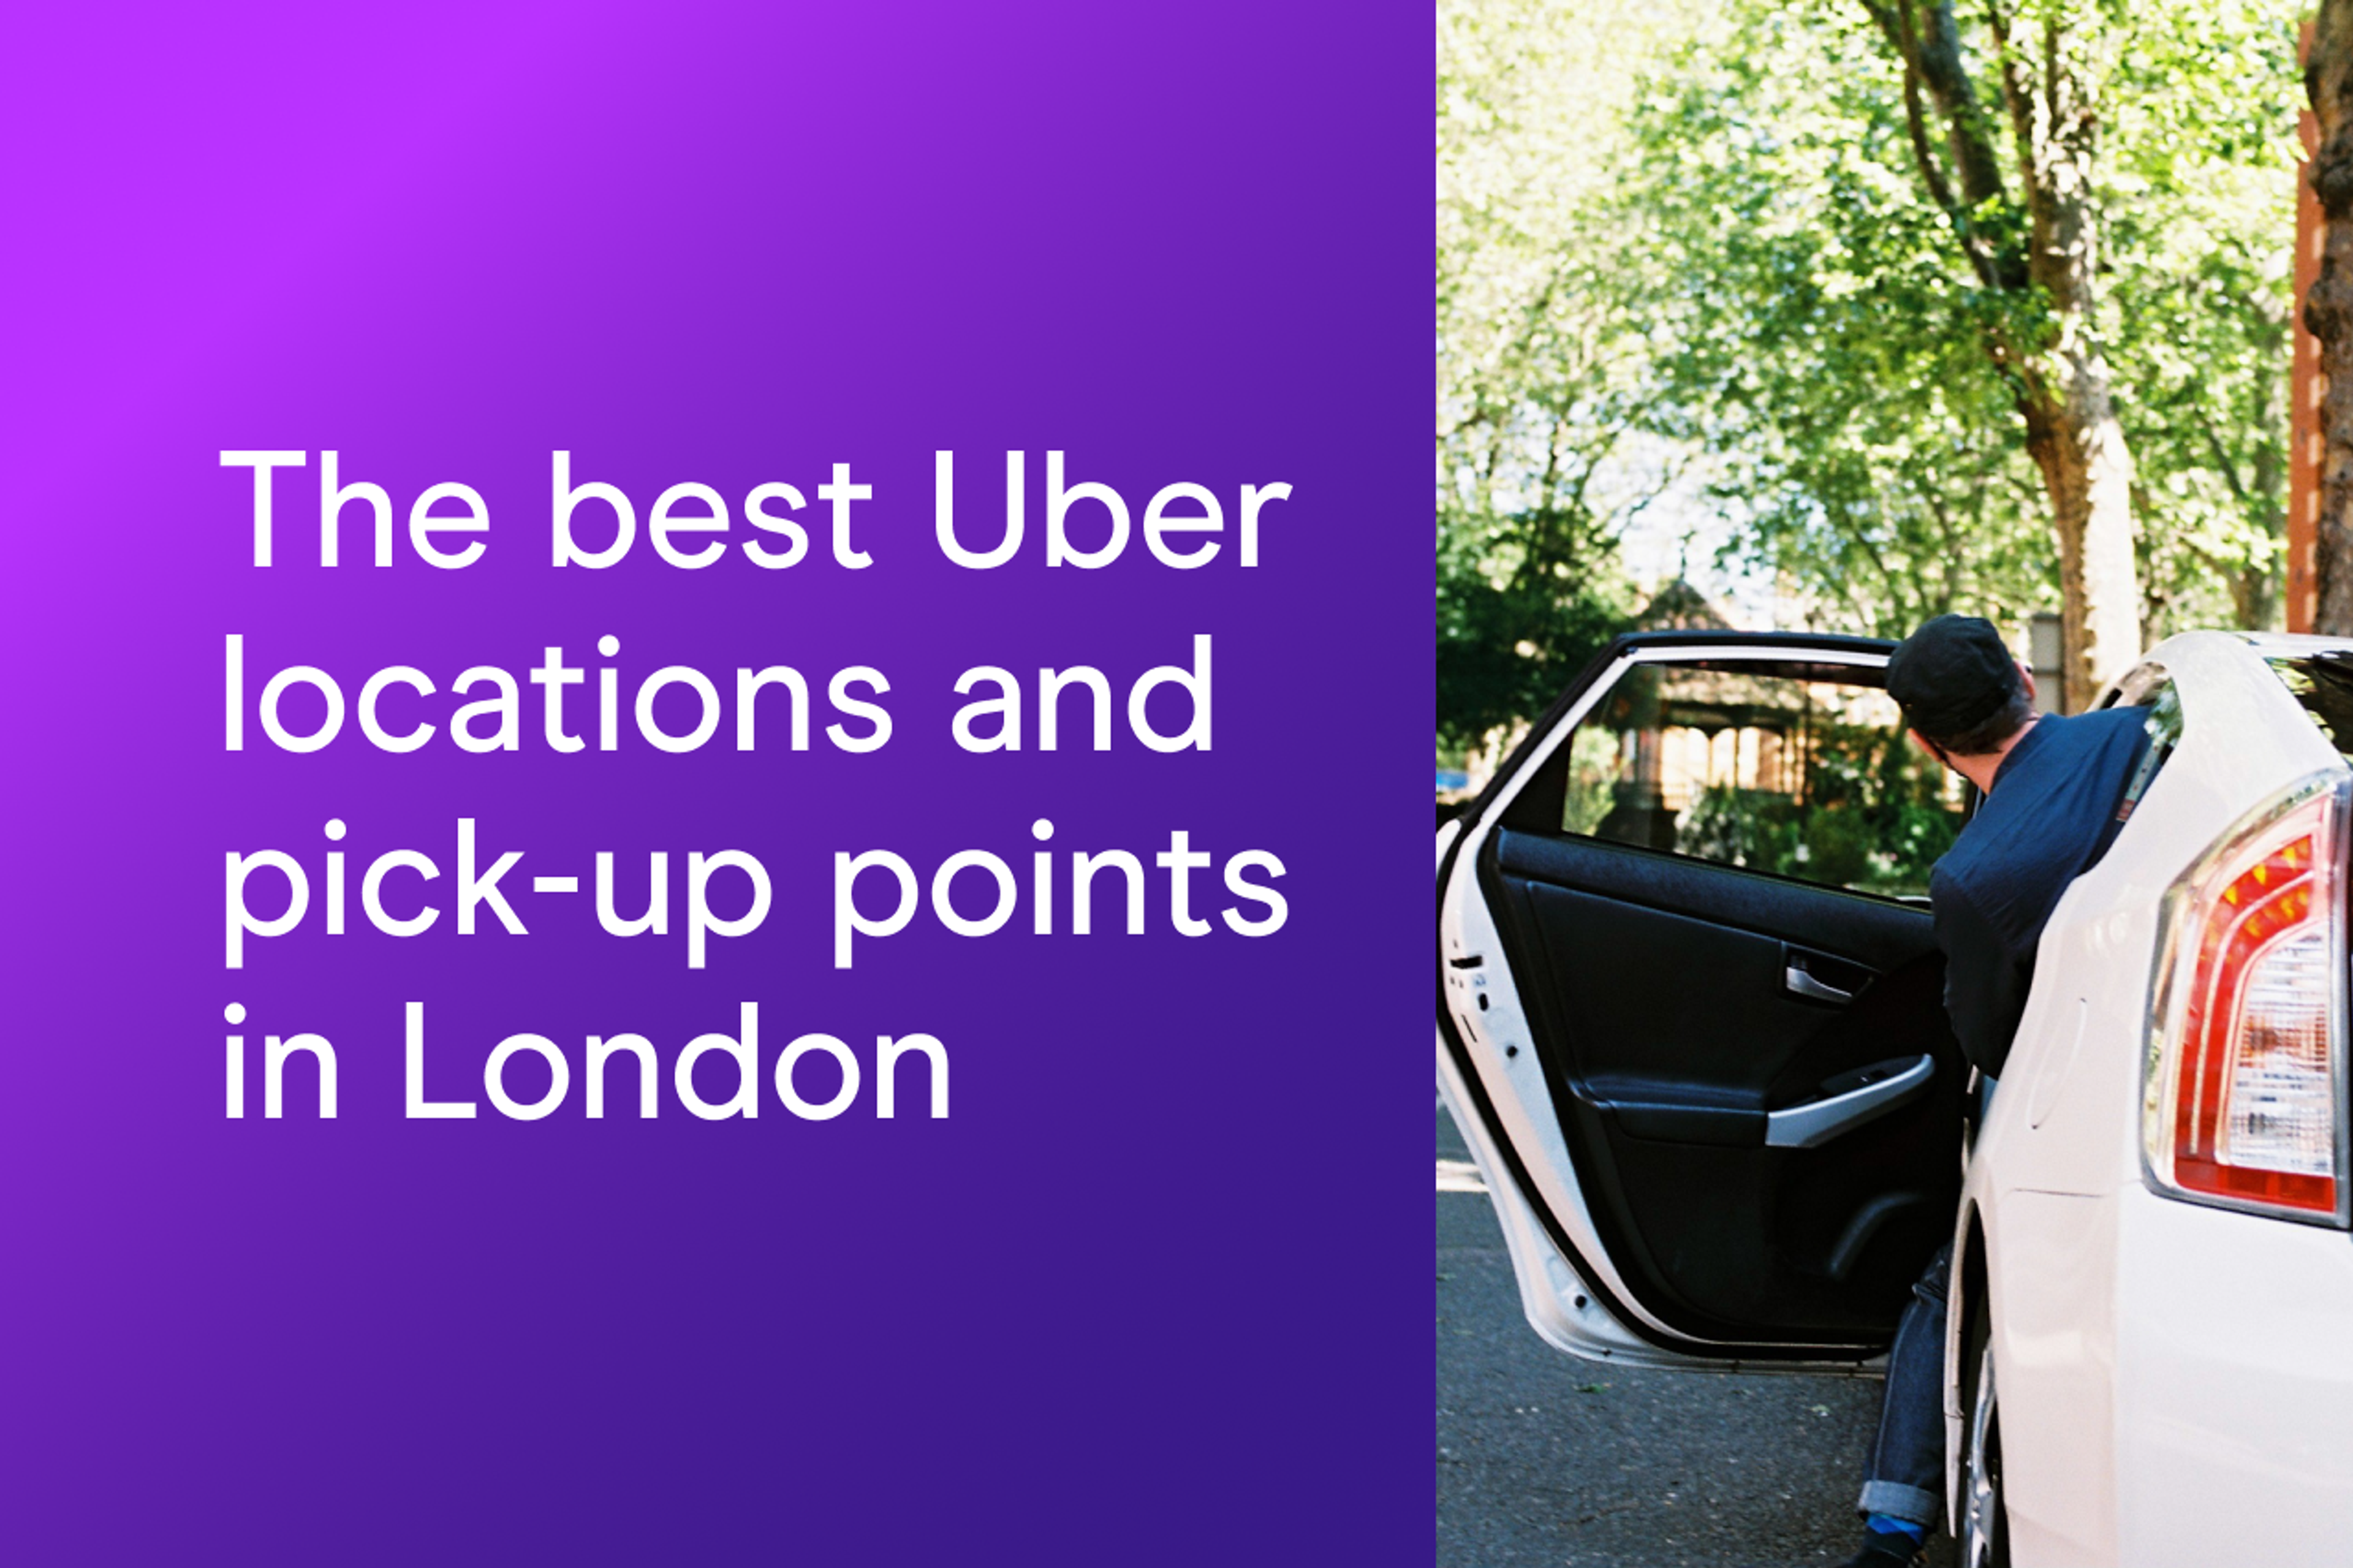 The Best Uber Locations and Pick-up Points in London